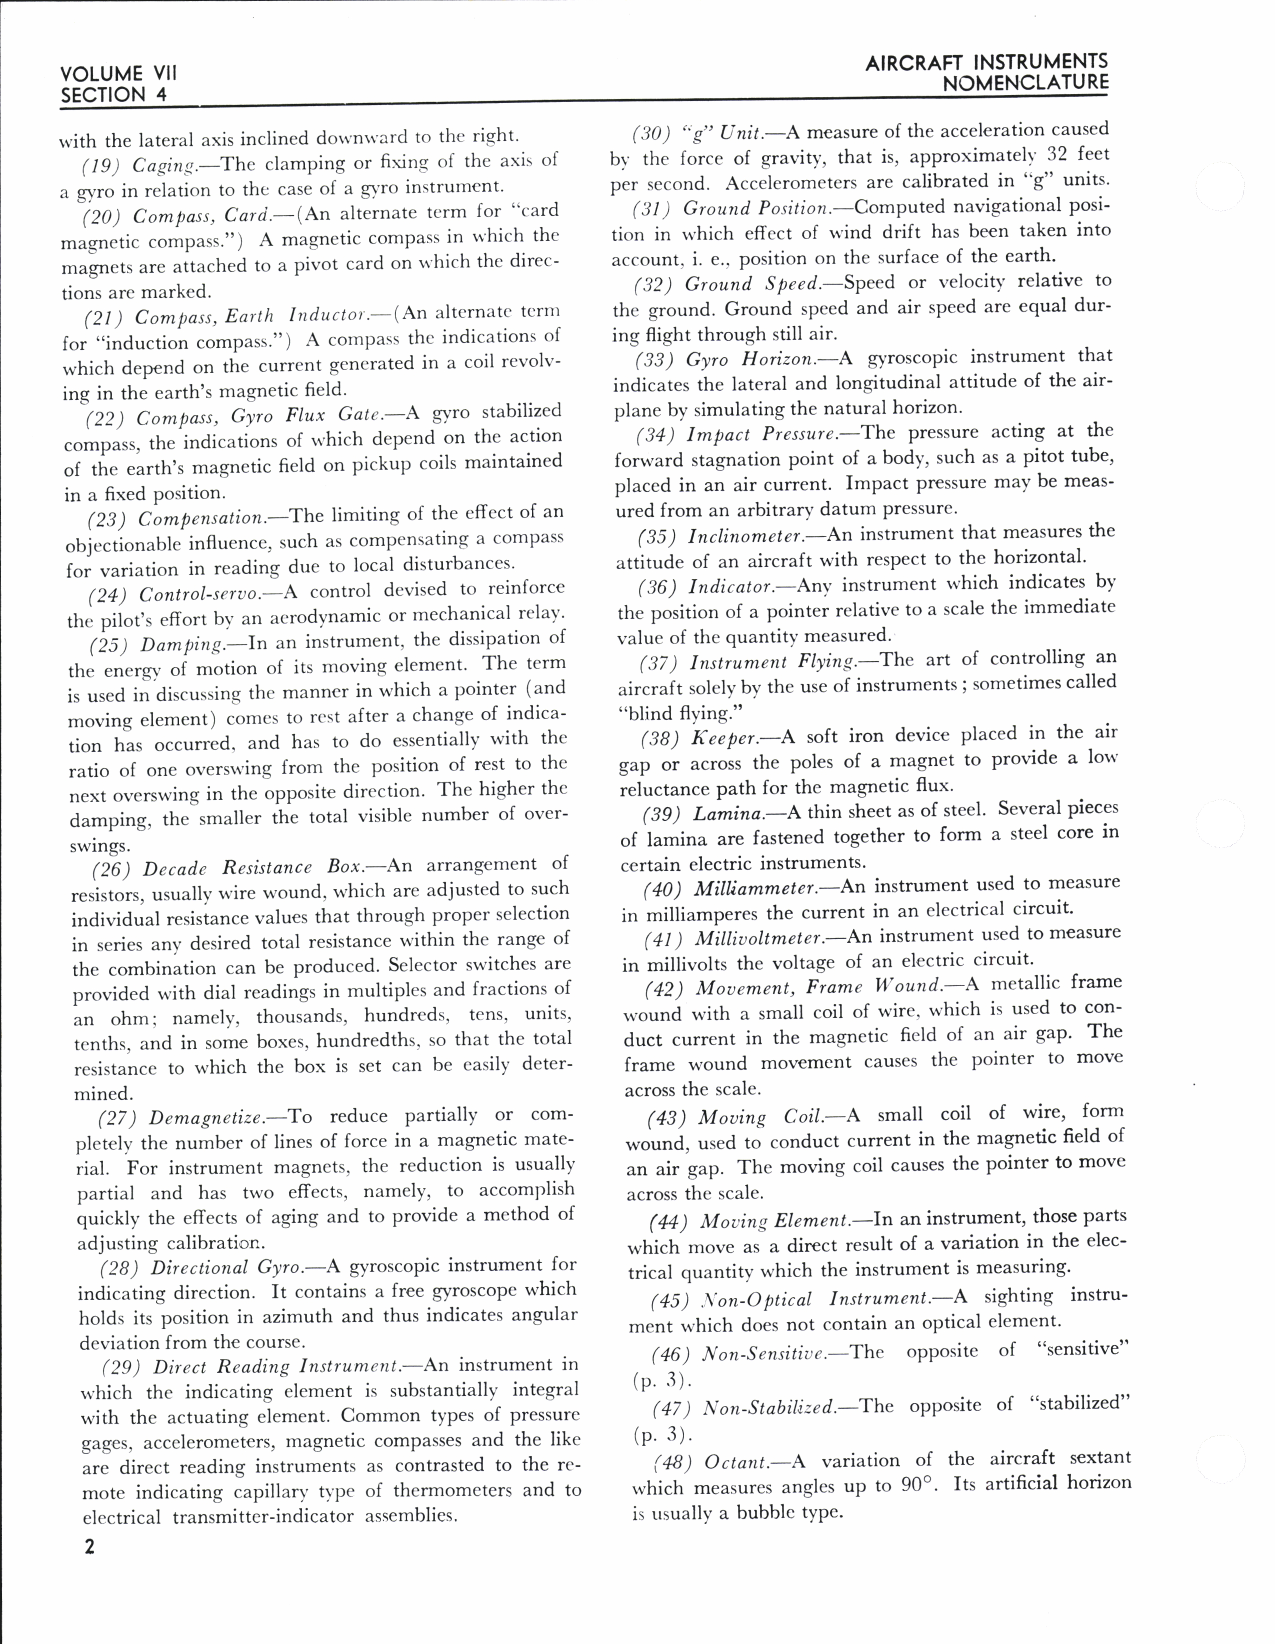 Sample page 8 from AirCorps Library document: Aeronautical Technical Inspection Manual - Aircraft Instruments